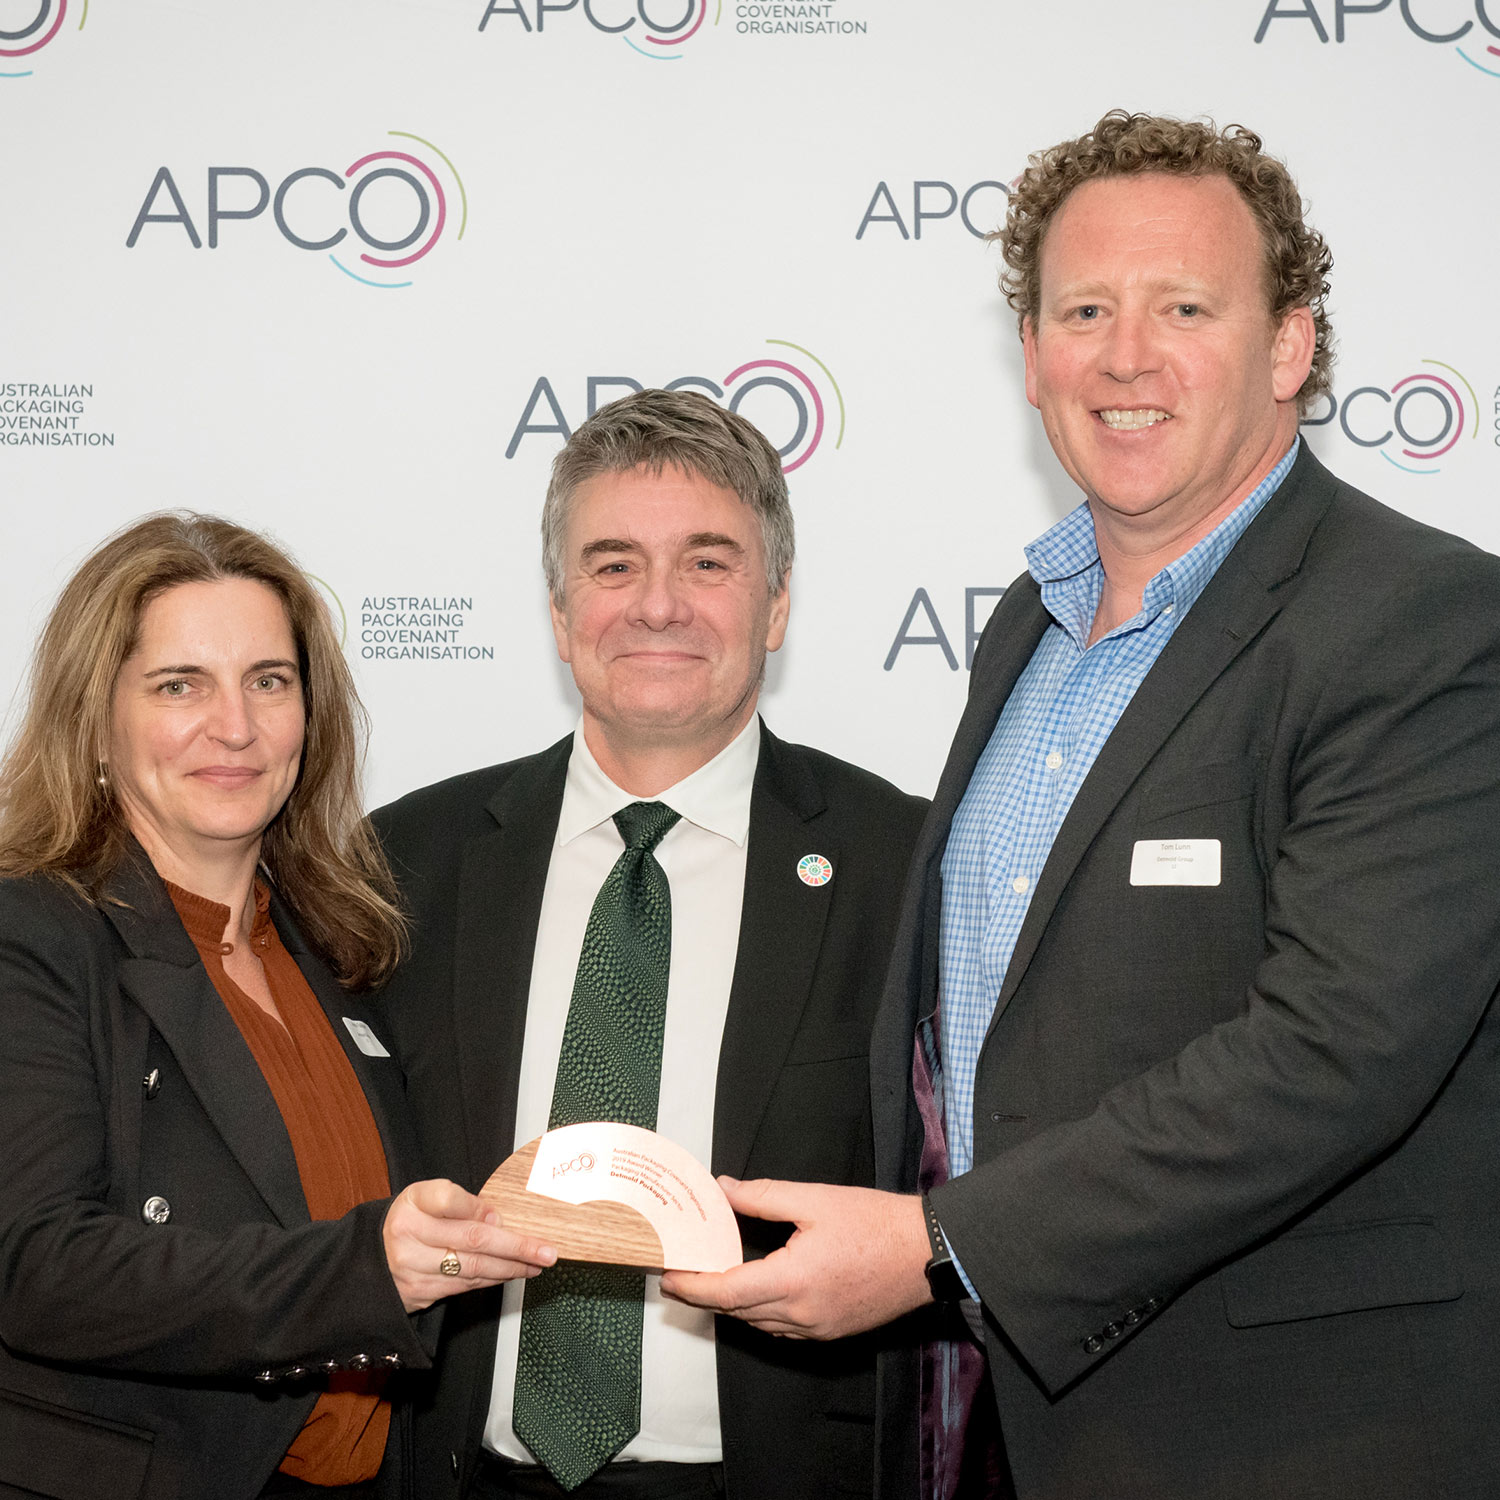 Image of Detmold Group's Anna Falkiner, APCO Director Andrew Petersen, and Detmold Group's Tom Lunn at the APCO Awards 2019